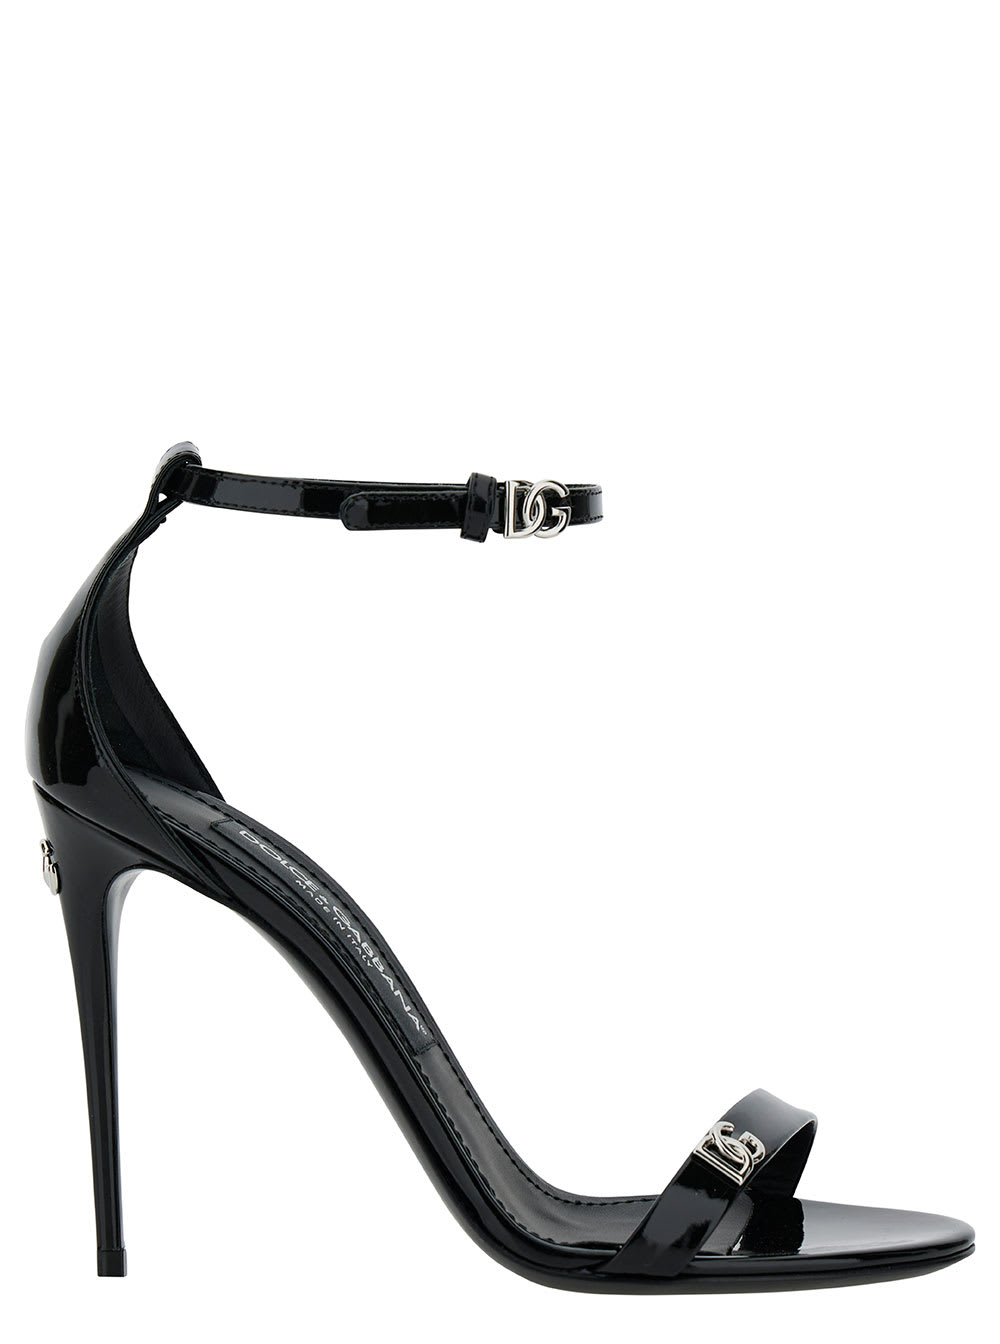 DOLCE & GABBANA BLACK SANDALS WITH DG LOGO DETAIL IN PATENT LEATHER WOMAN